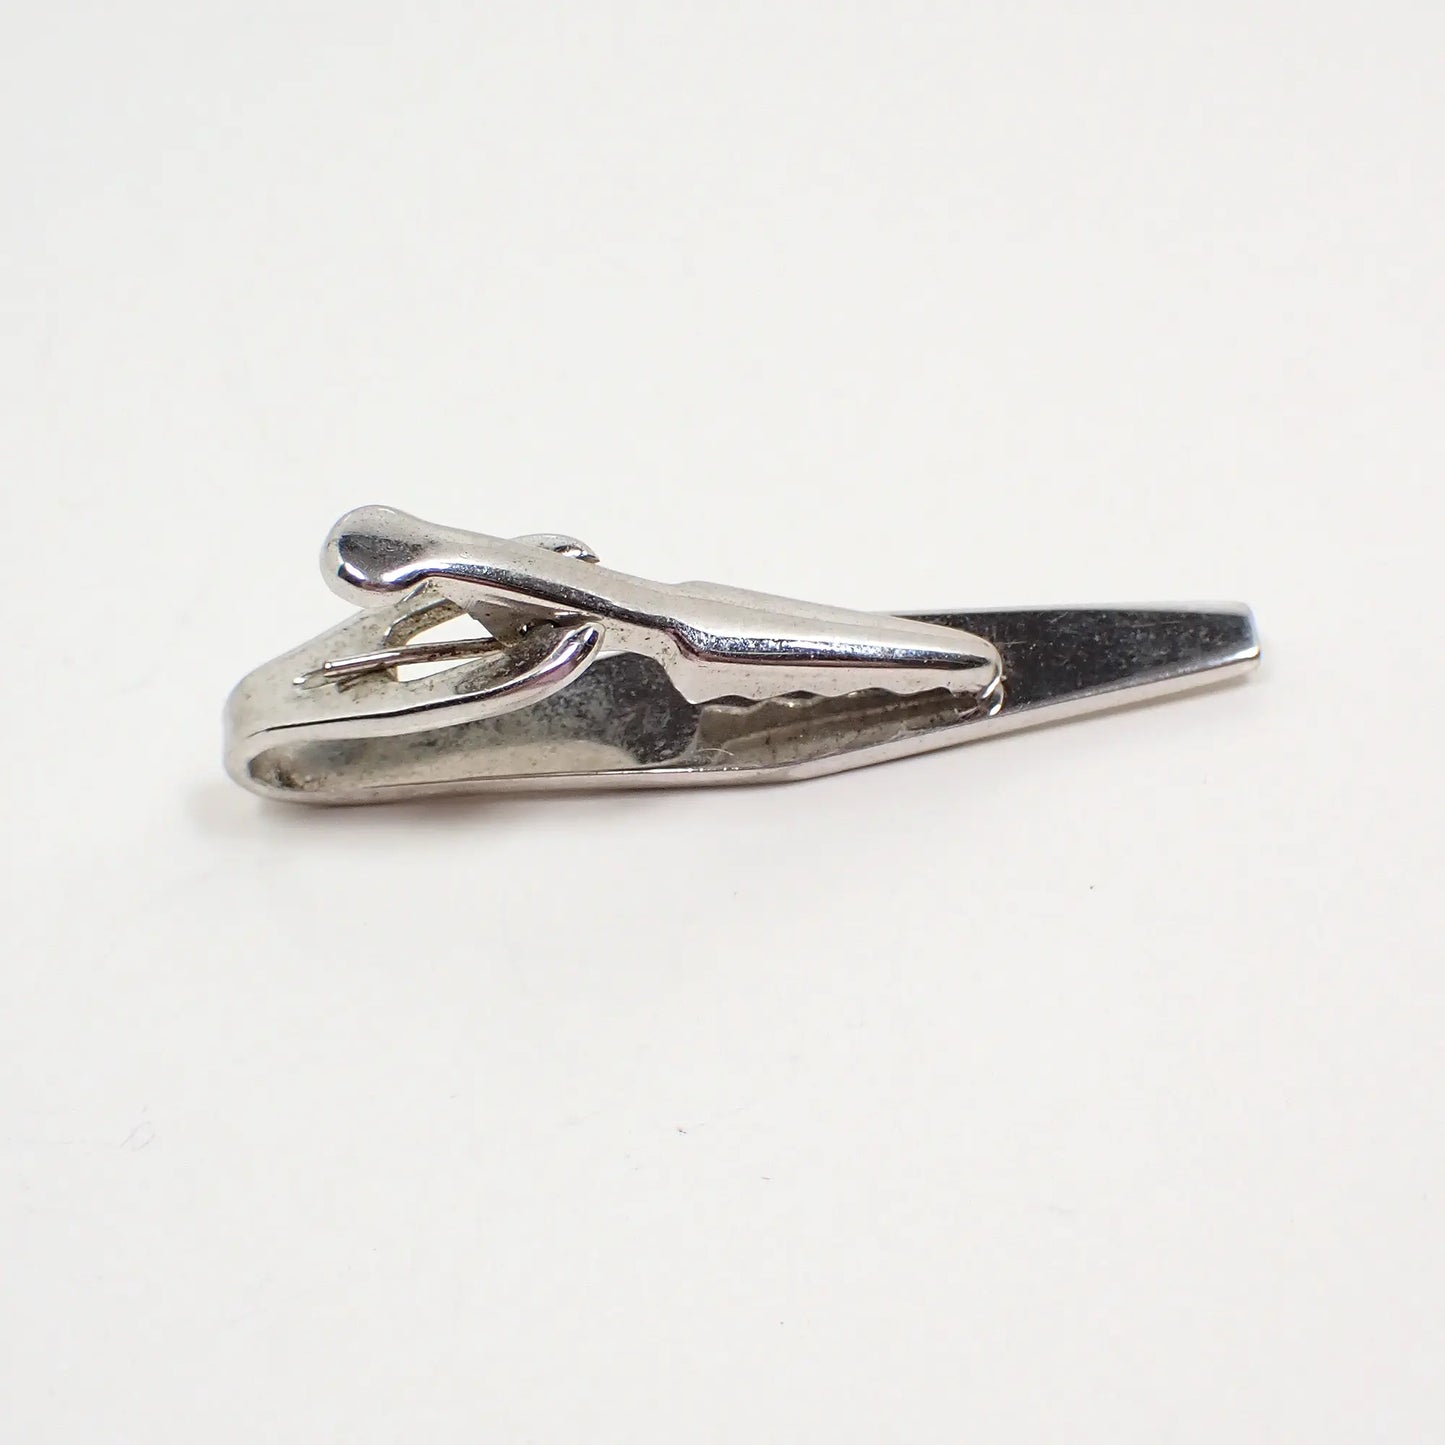 Angled Atomic Modernist Silver Tone Mid Century Vintage Tie Clip Clasp